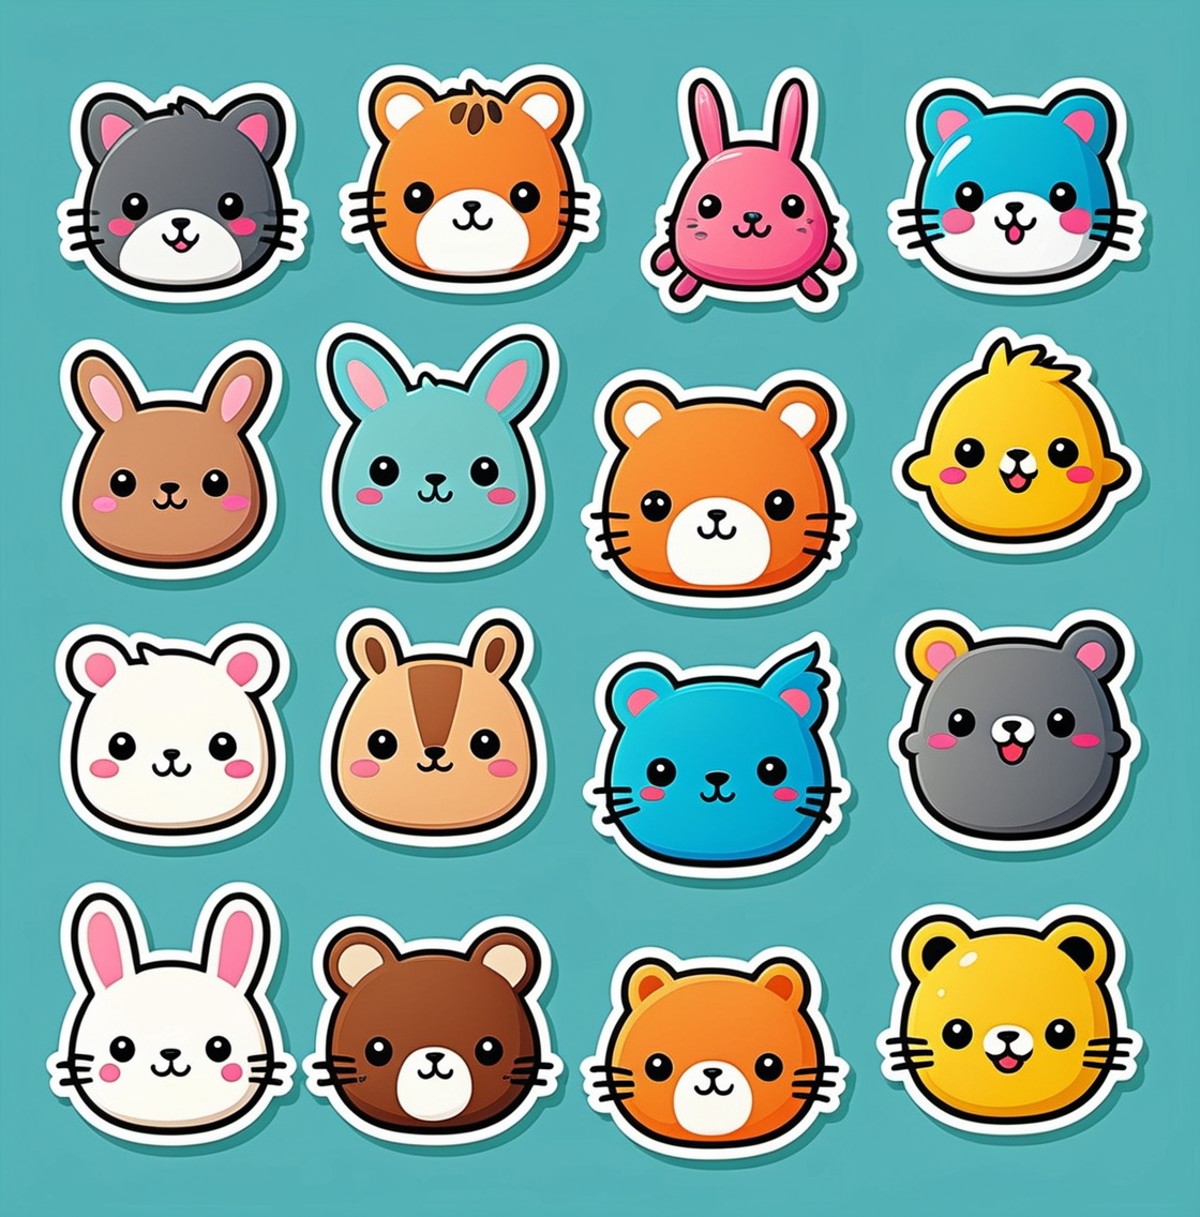 Design a collection of cute kawaii stickers with different fun motifs and figures. Cute cartoon animals kawaii funny splas...